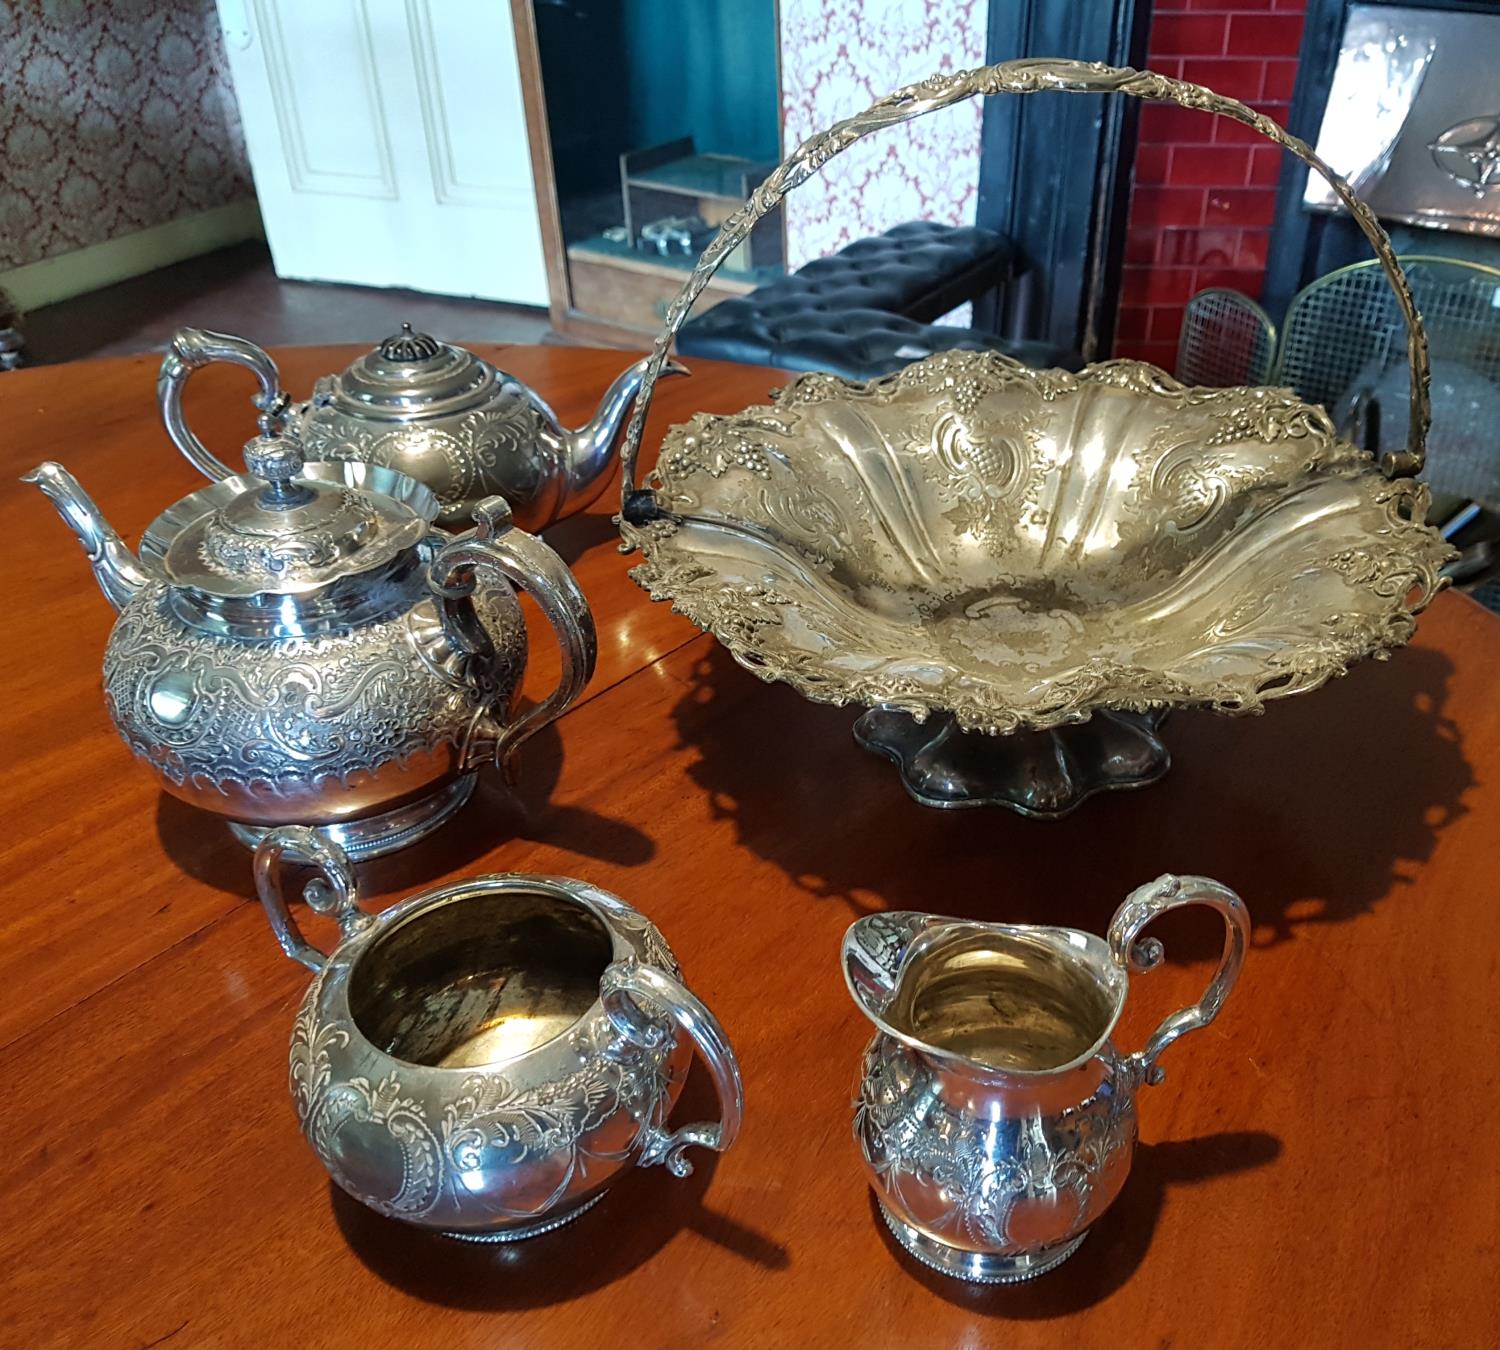 A 19th Century Silver Plated Teaset along with a Silver Plated Centre Basket.